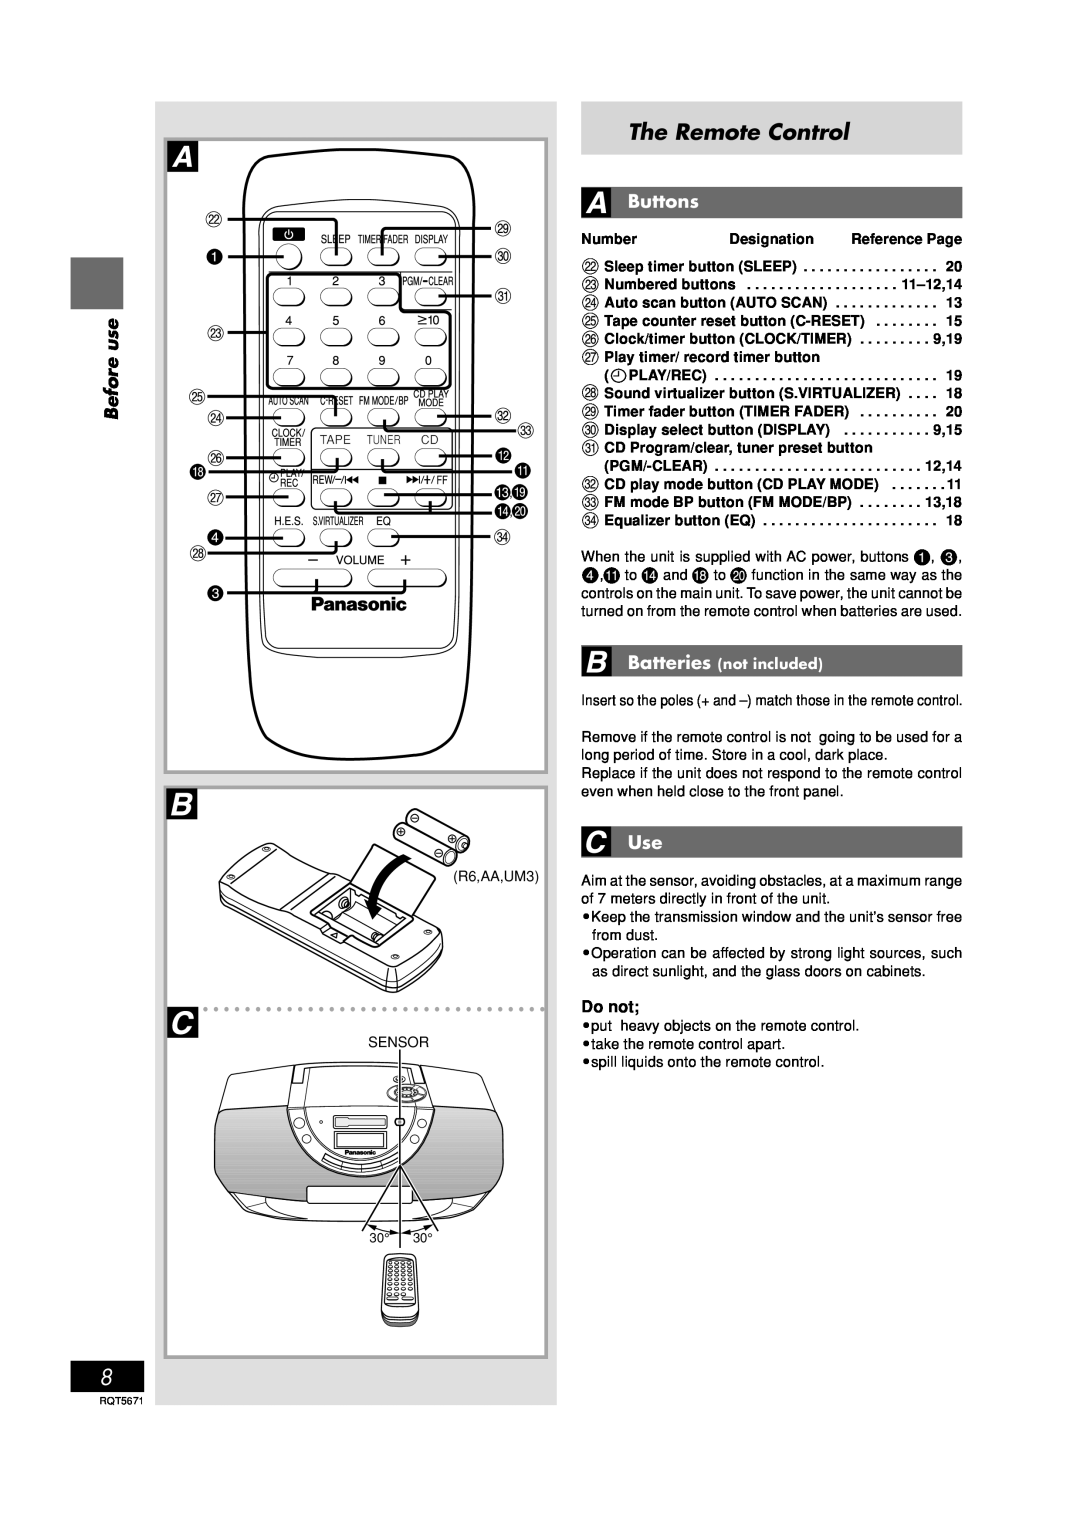 Panasonic RX-EX1 operating instructions The Remote Control, Buttons, Do not, Before, Batteries not included 